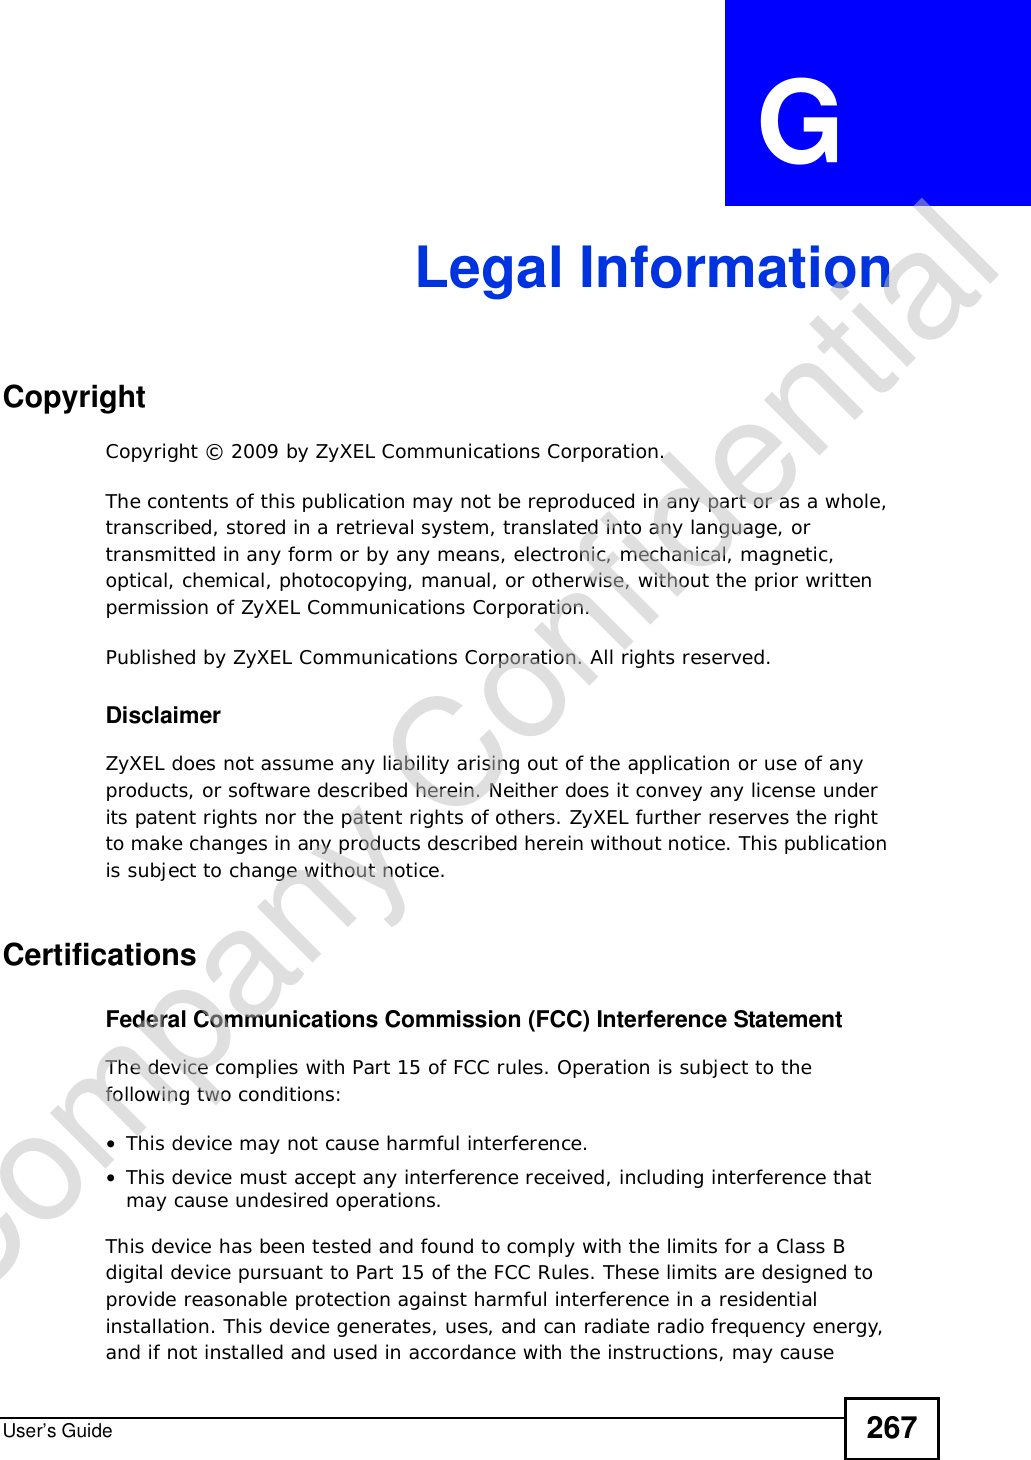 User’s Guide 267APPENDIX  G Legal InformationCopyrightCopyright © 2009 by ZyXEL Communications Corporation.The contents of this publication may not be reproduced in any part or as a whole, transcribed, stored in a retrieval system, translated into any language, or transmitted in any form or by any means, electronic, mechanical, magnetic, optical, chemical, photocopying, manual, or otherwise, without the prior written permission of ZyXEL Communications Corporation.Published by ZyXEL Communications Corporation. All rights reserved.DisclaimerZyXEL does not assume any liability arising out of the application or use of any products, or software described herein. Neither does it convey any license under its patent rights nor the patent rights of others. ZyXEL further reserves the right to make changes in any products described herein without notice. This publication is subject to change without notice.CertificationsFederal Communications Commission (FCC) Interference StatementThe device complies with Part 15 of FCC rules. Operation is subject to the following two conditions:•This device may not cause harmful interference.•This device must accept any interference received, including interference that may cause undesired operations.This device has been tested and found to comply with the limits for a Class B digital device pursuant to Part 15 of the FCC Rules. These limits are designed to provide reasonable protection against harmful interference in a residential installation. This device generates, uses, and can radiate radio frequency energy, and if not installed and used in accordance with the instructions, may cause Company Confidential